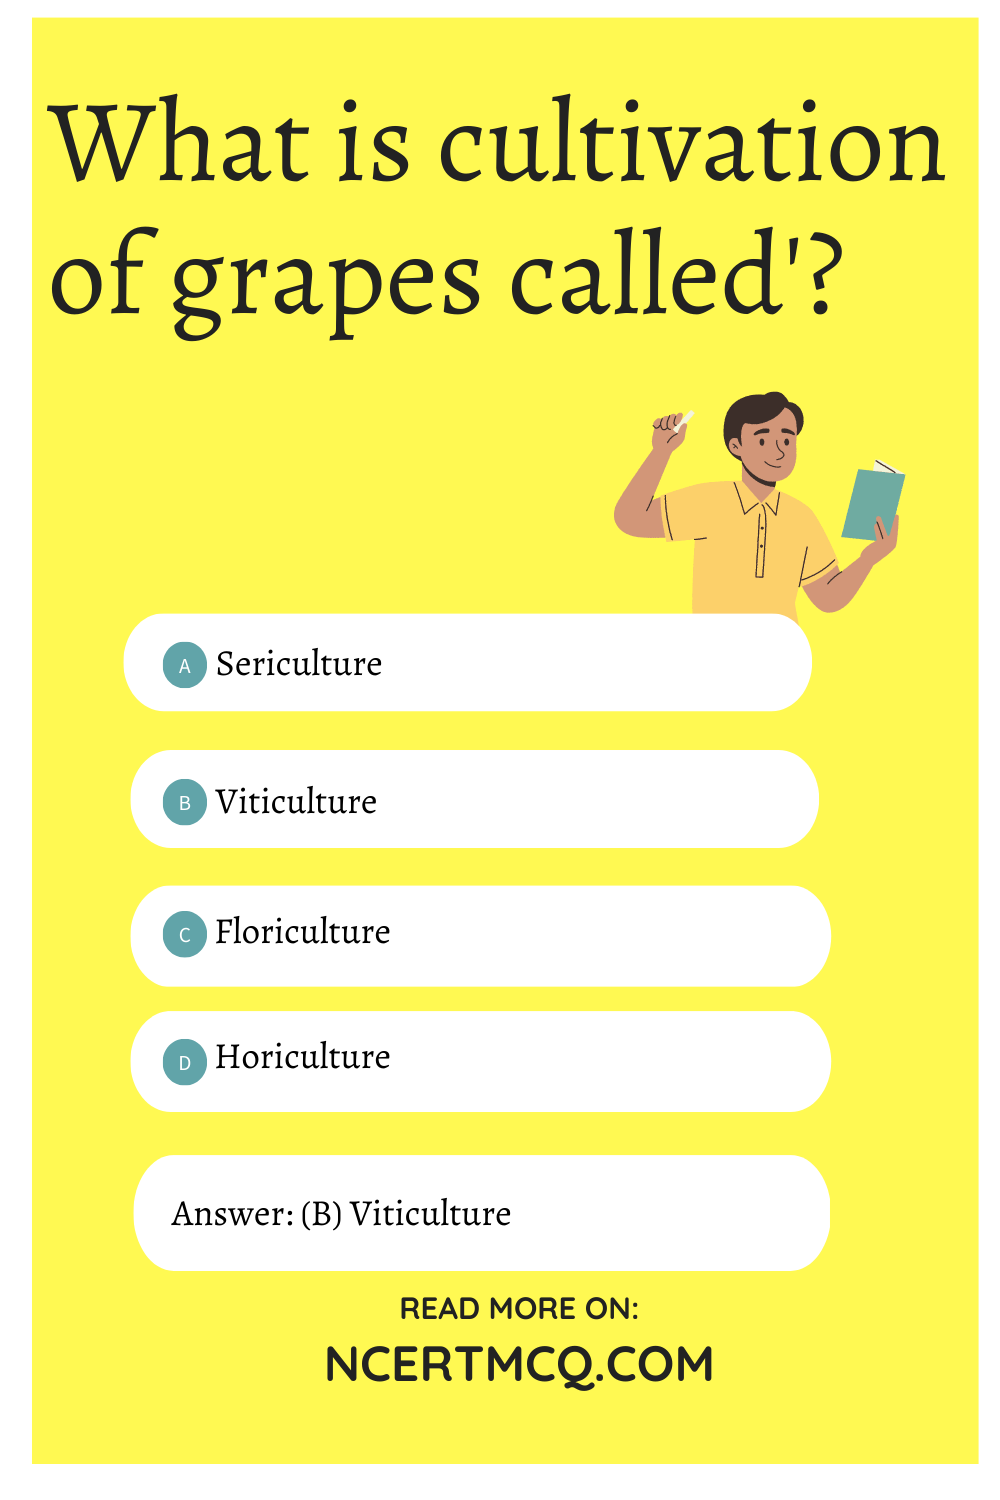 What is cultivation of grapes called'?